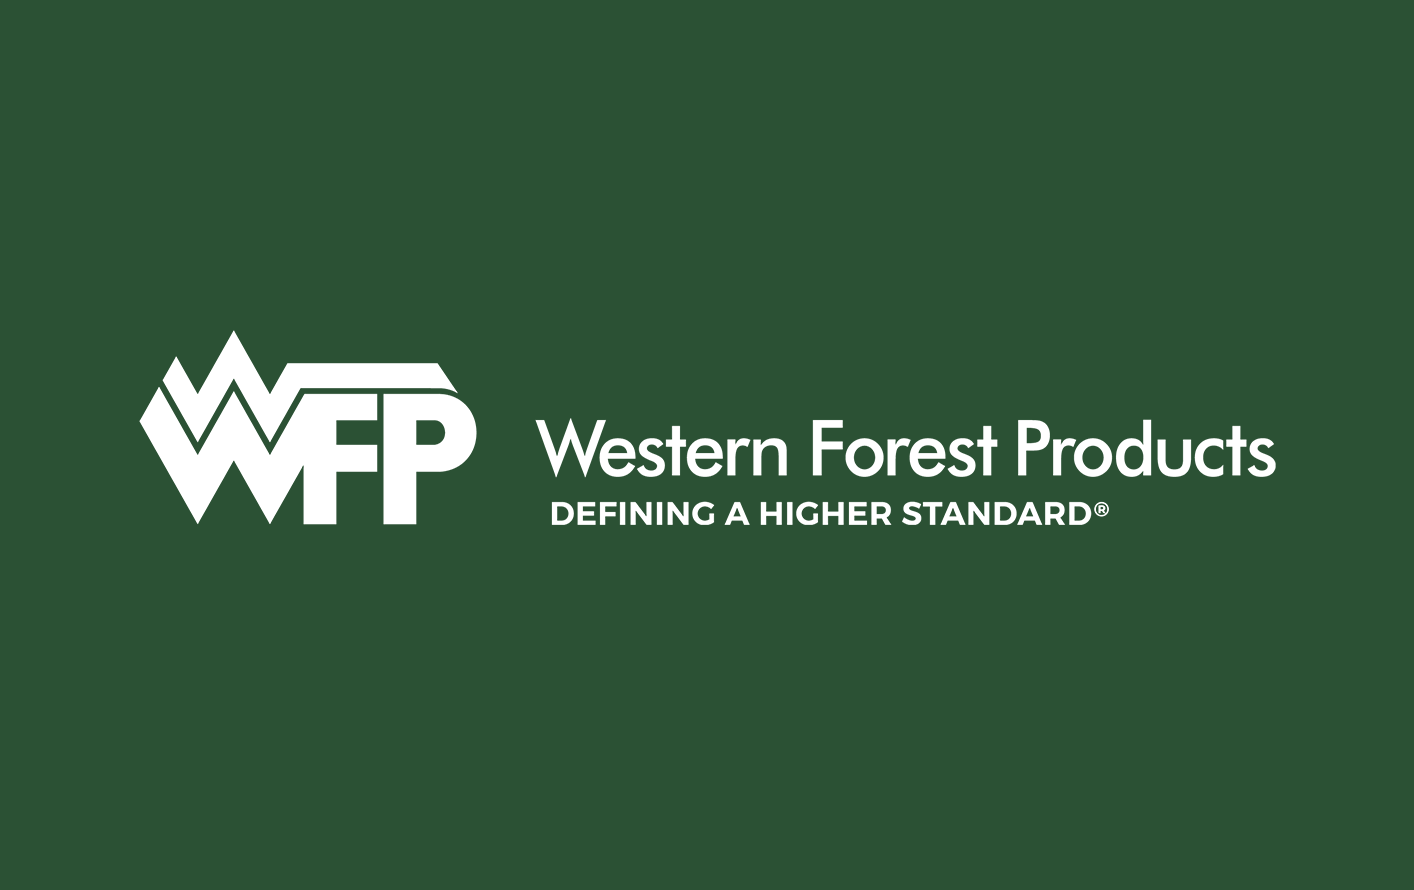 WESTERN FOREST PRODUCTS AND QUATSINO FIRST NATION COLLABORATE ON CARBON DATA RESEARCH